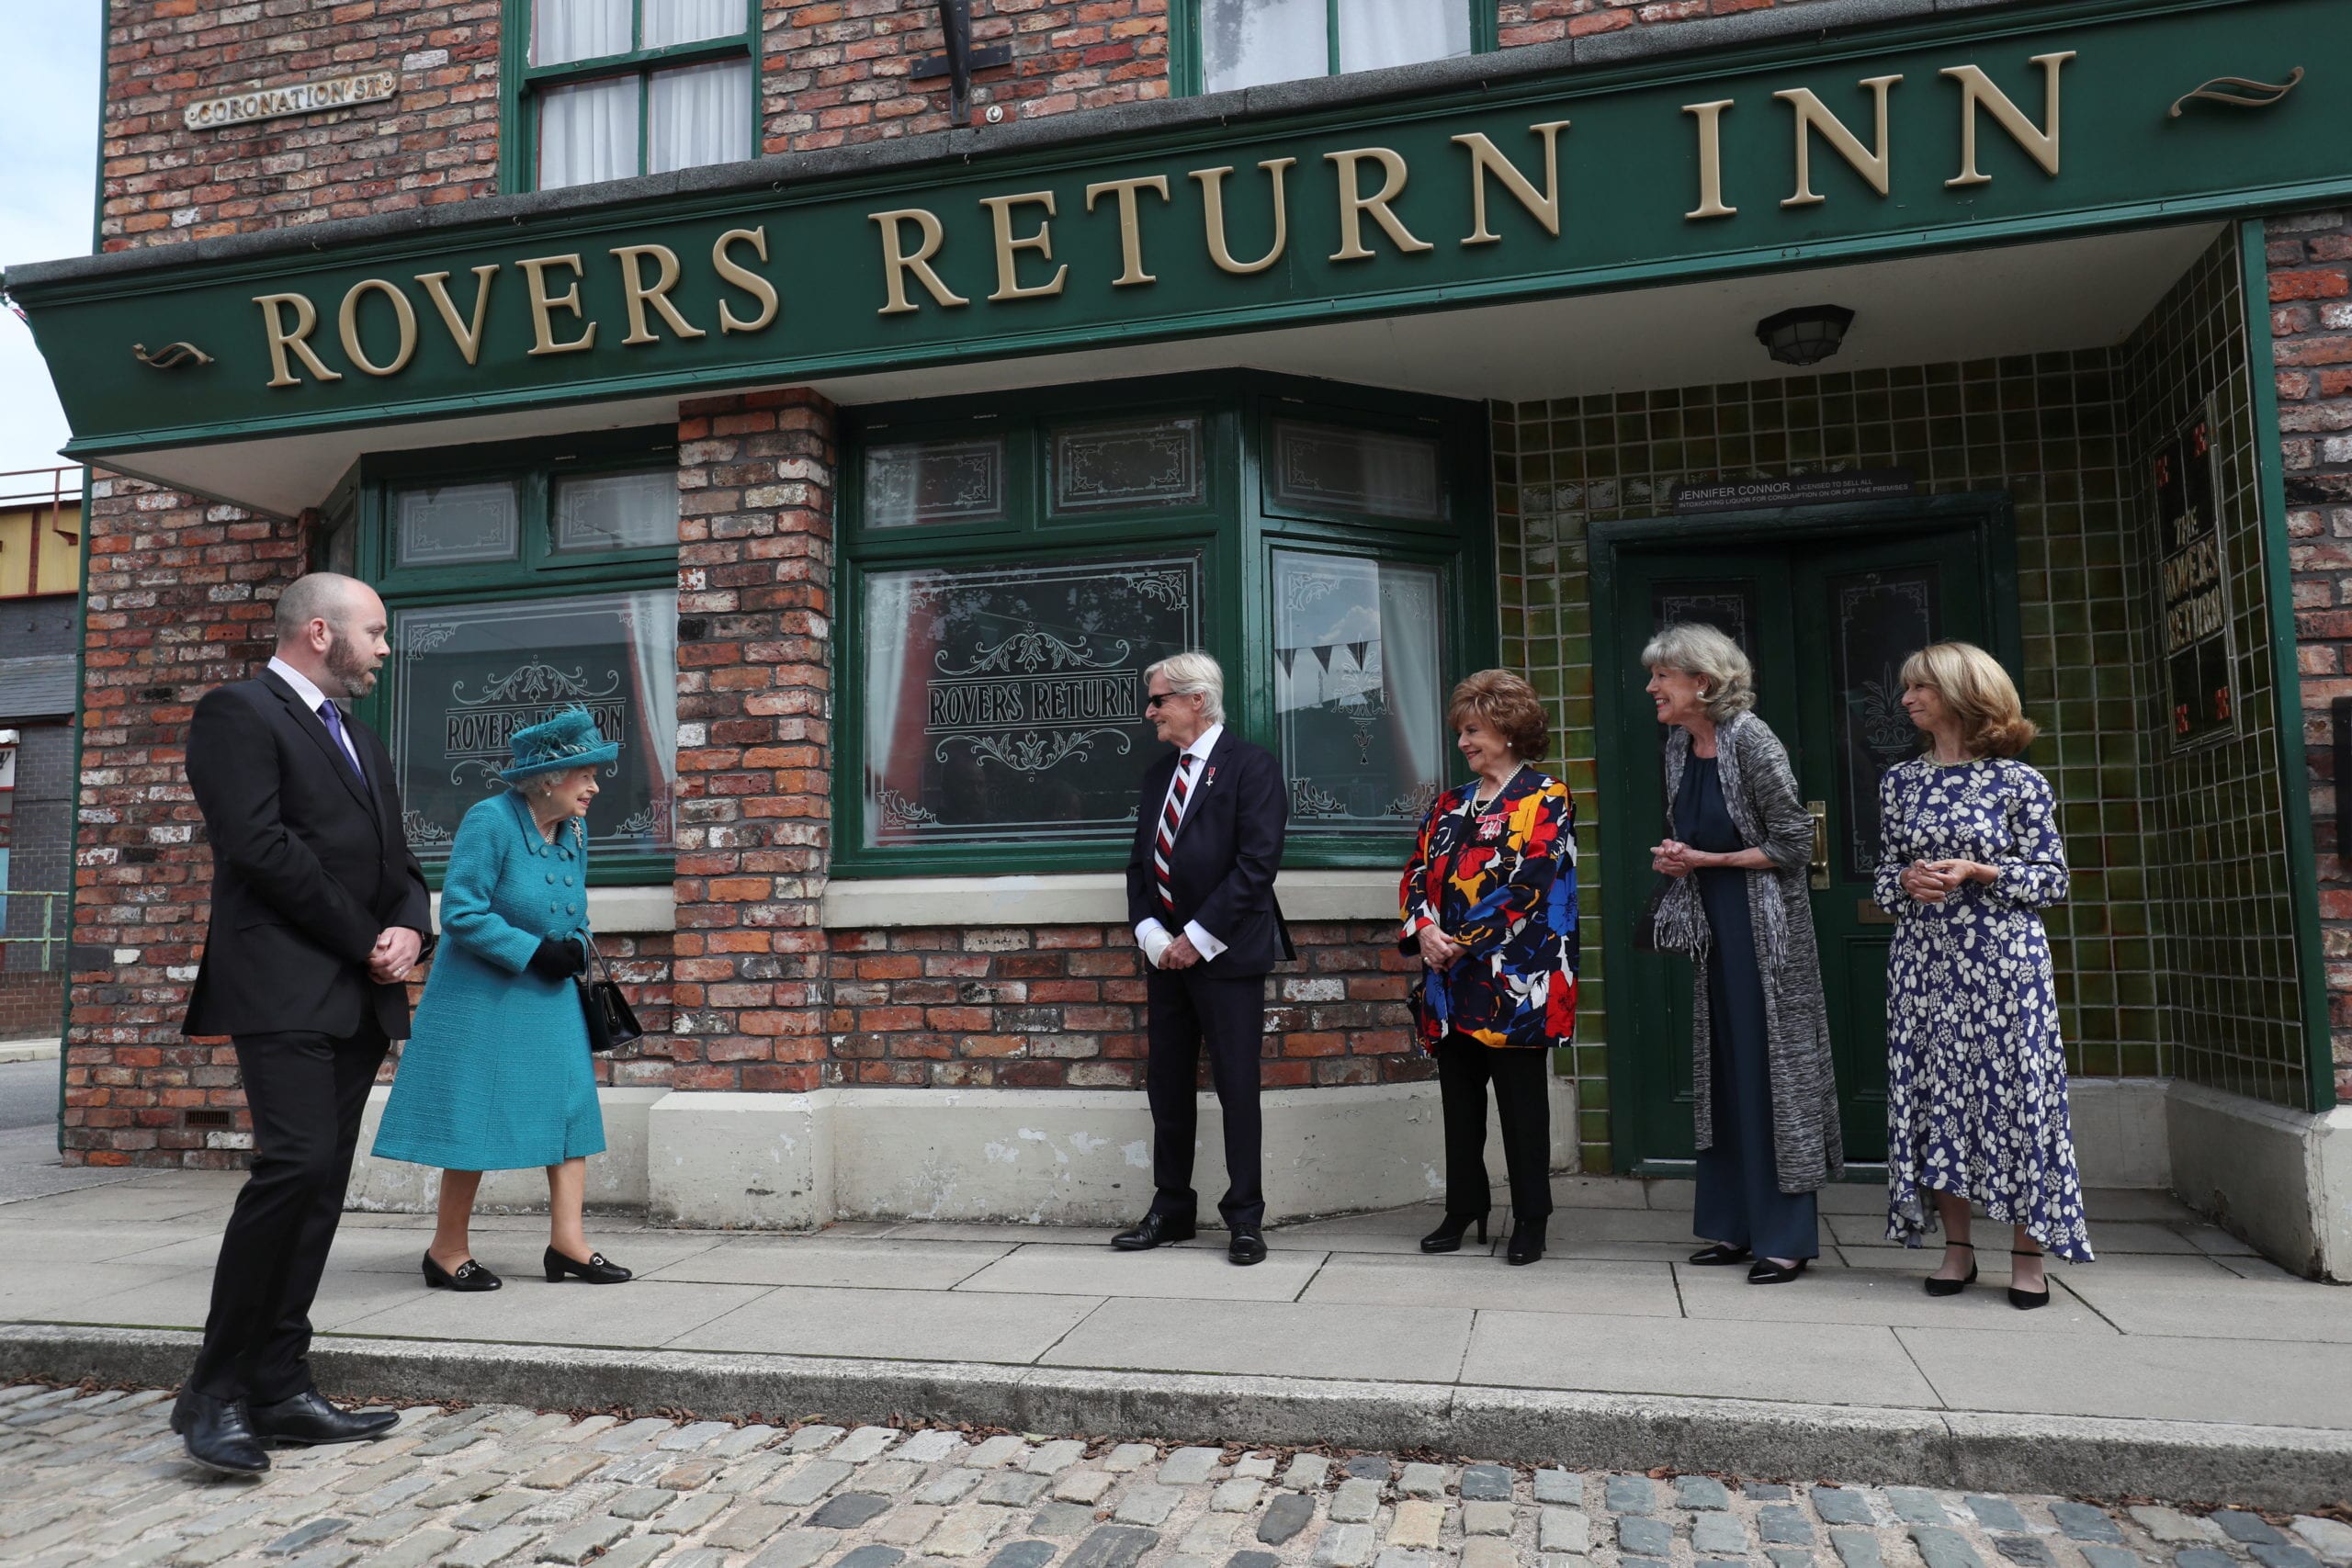 Britain's Queen Elizabeth meets actors William Roache, Barbara Knox, Sue Nicholls and Helen Worth, during a visit to the set of the long running television series 'Coronation Street', in Manchester, Britain, July 8, 2021. Scott Heppell/Pool via REUTERS